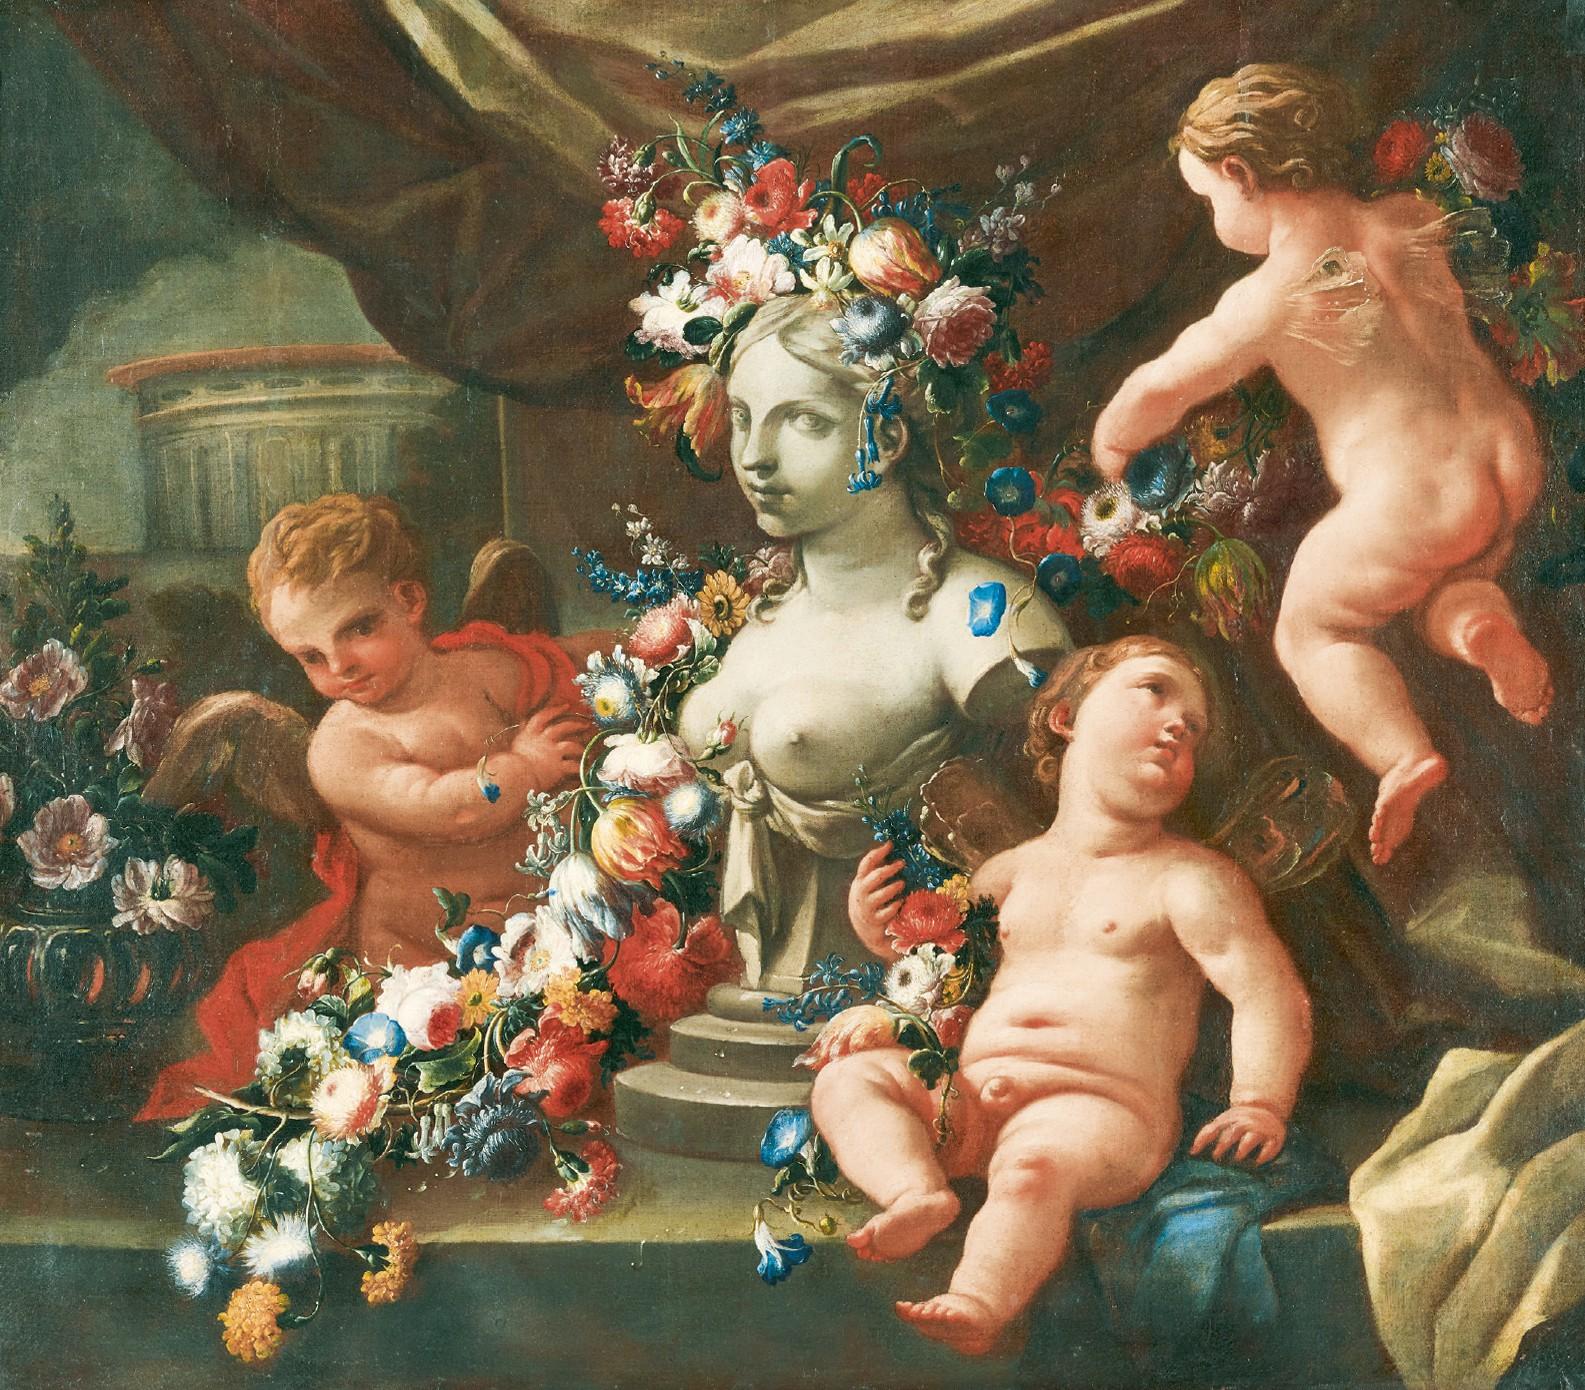 Oil painting on canvas by Nicola Vaccaro (Napoli, 13 marzo 1640 – Napoli, 25 maggio 1709), for the figures, and Andrea Belvedere (Napoli, 1646-1652 – Napoli, 1732) for the still life, depicting Allegory of Sculpture.

 Important wooden frame carved